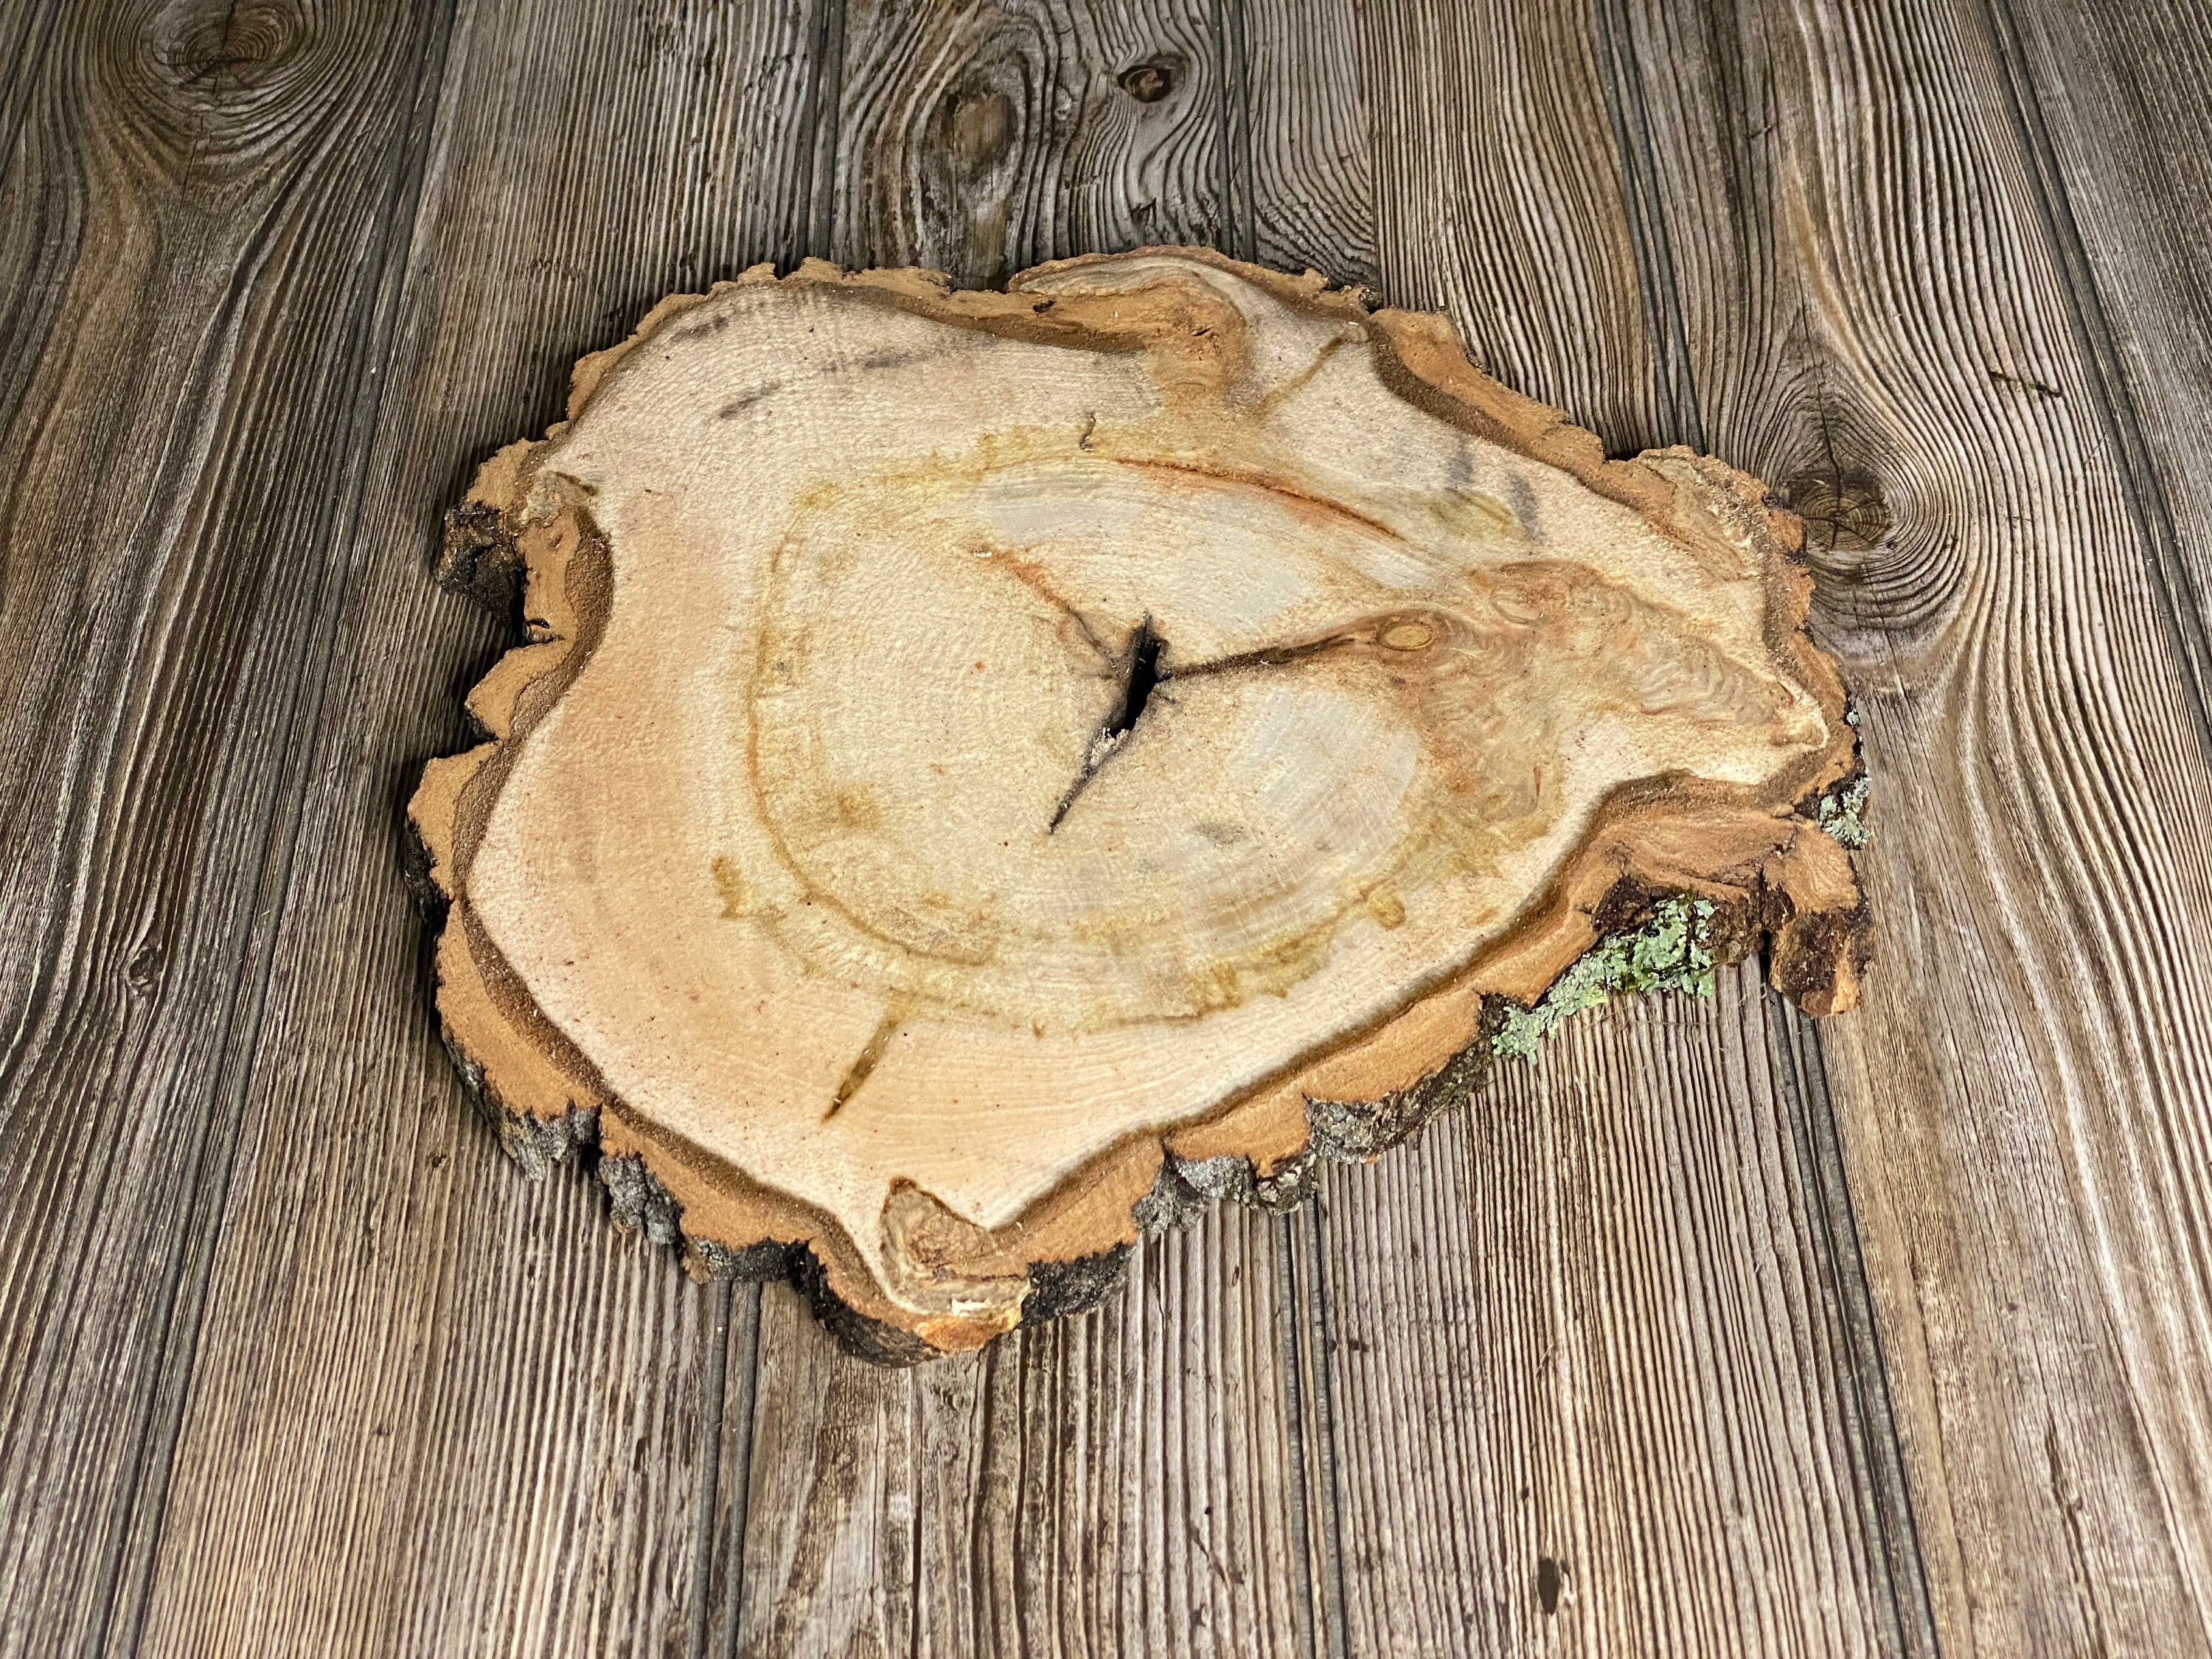 Aspen Burl Slice, Approximately 12 Inches Long by 12 Inches Wide and 3/4 Inch Thick